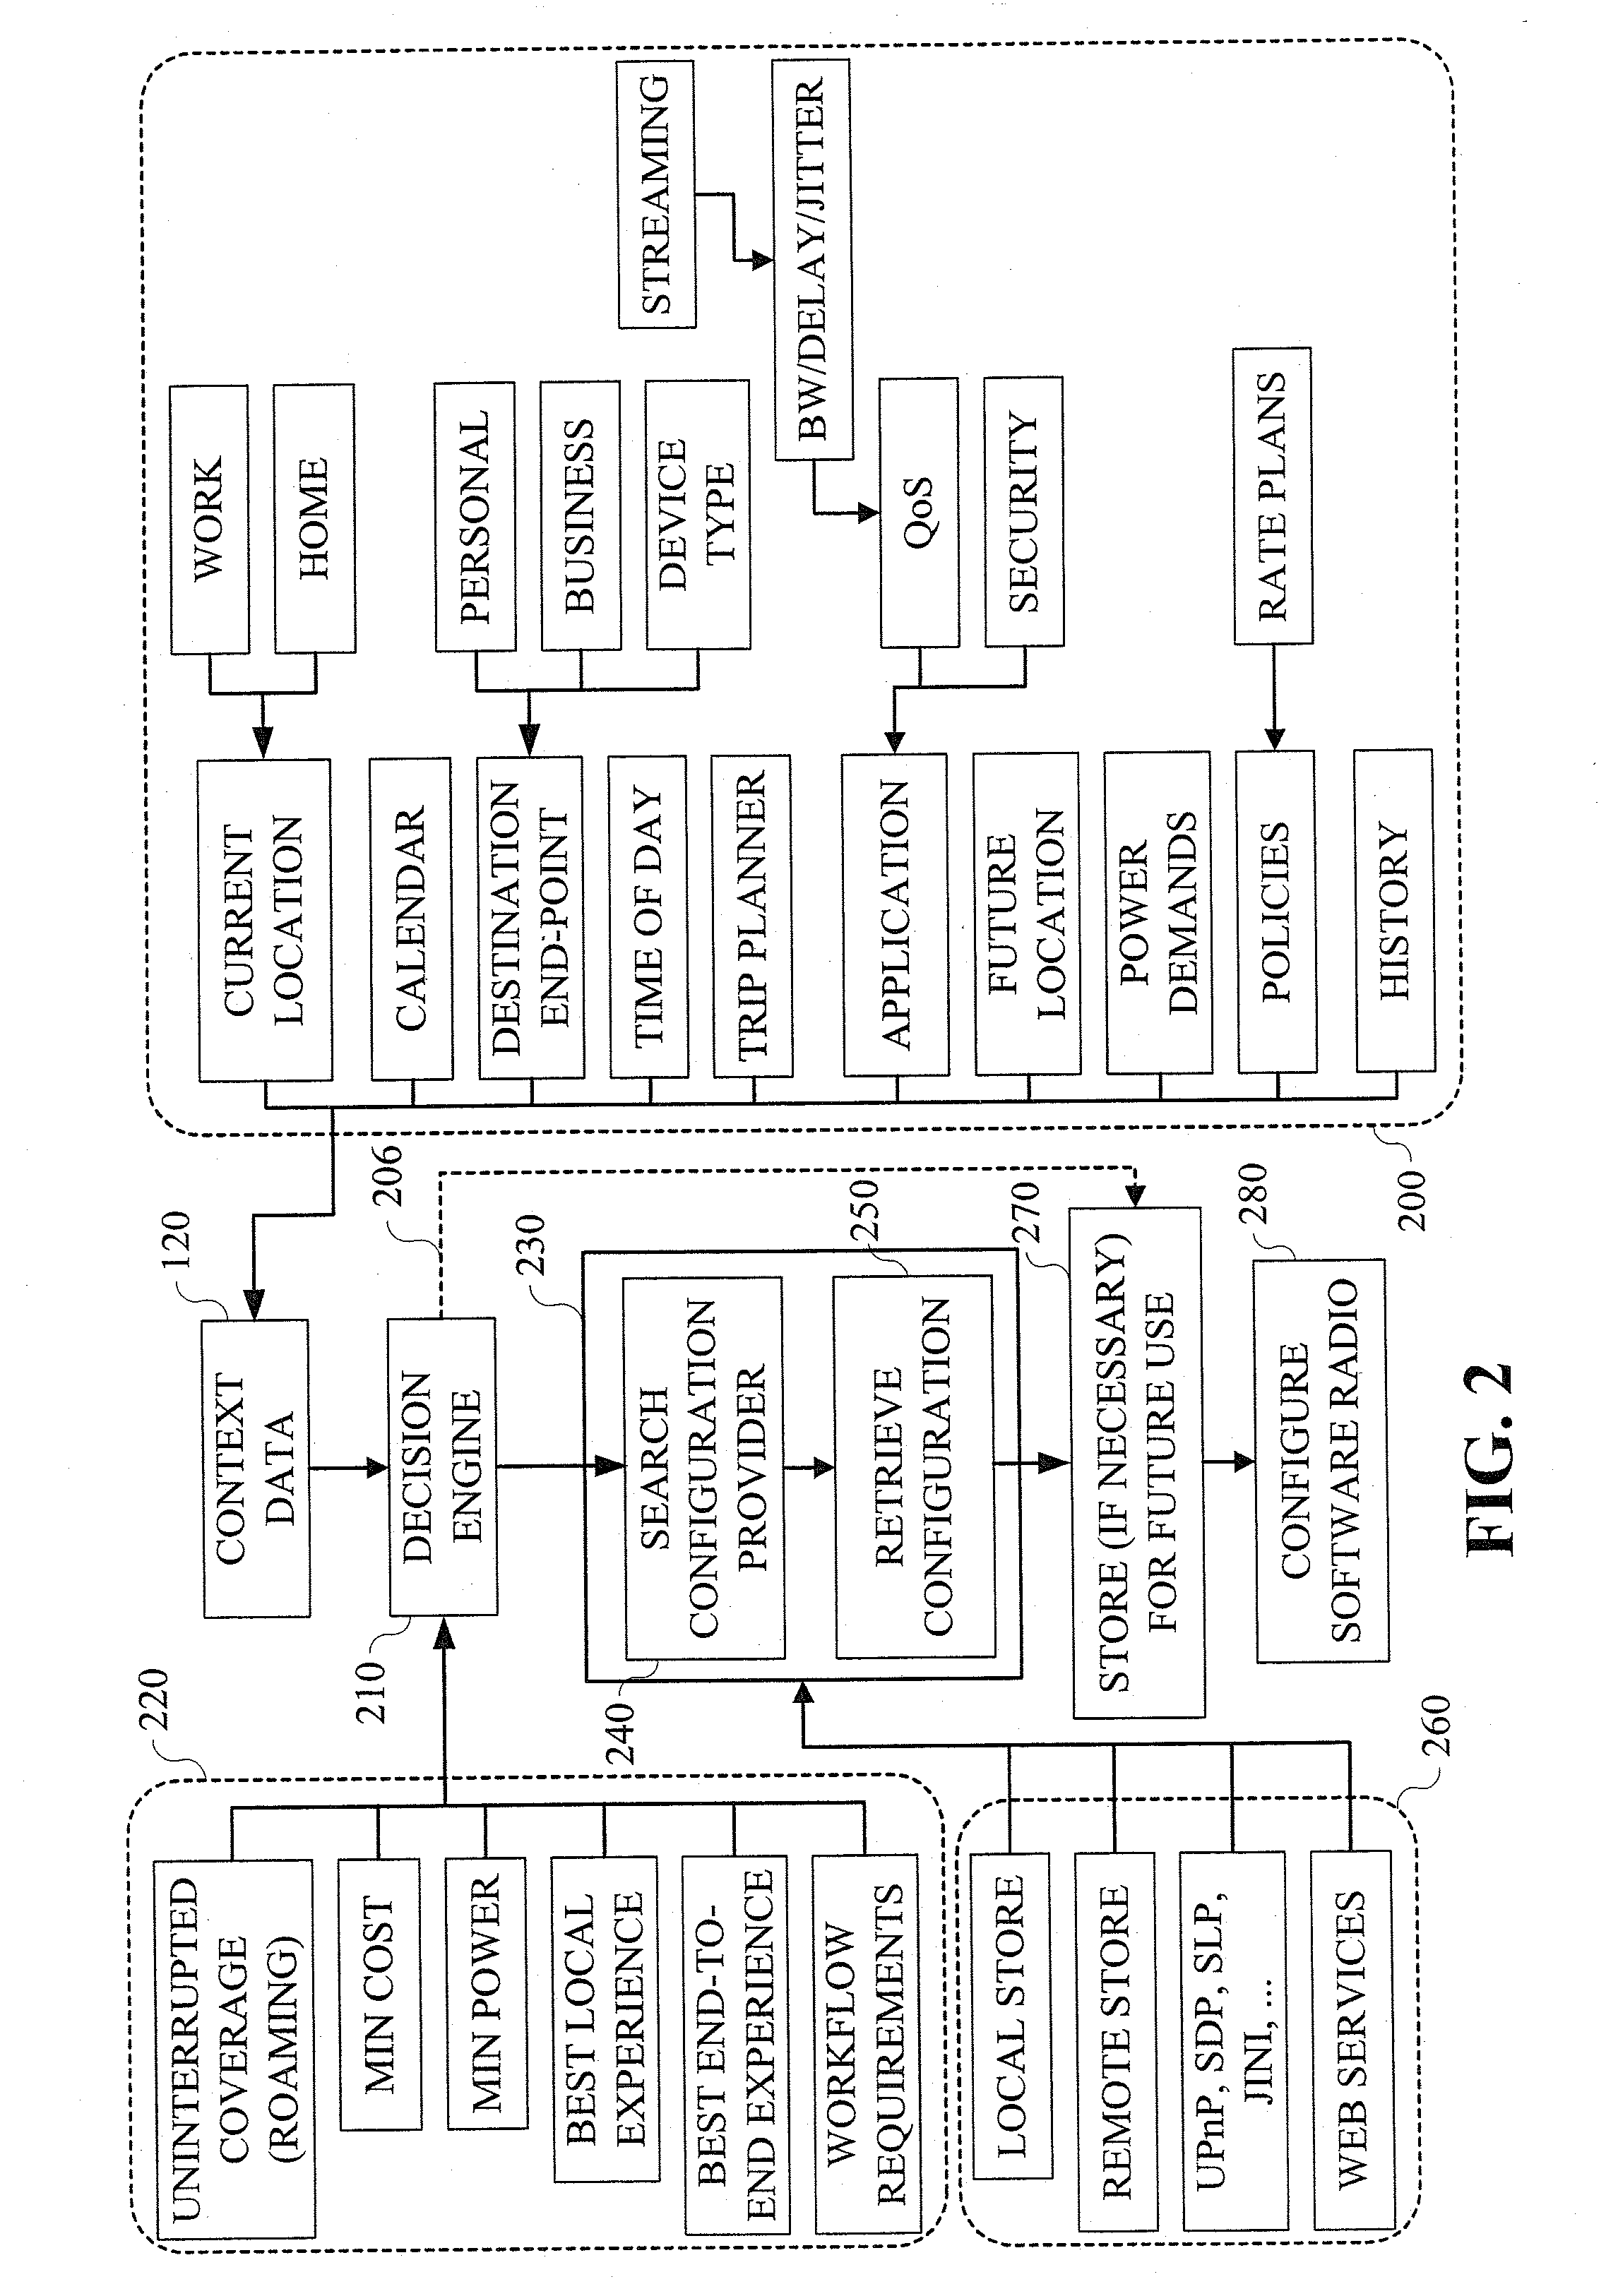 Method and Apparatus for Preconditioning Mobile Devices for Network and Other Operations